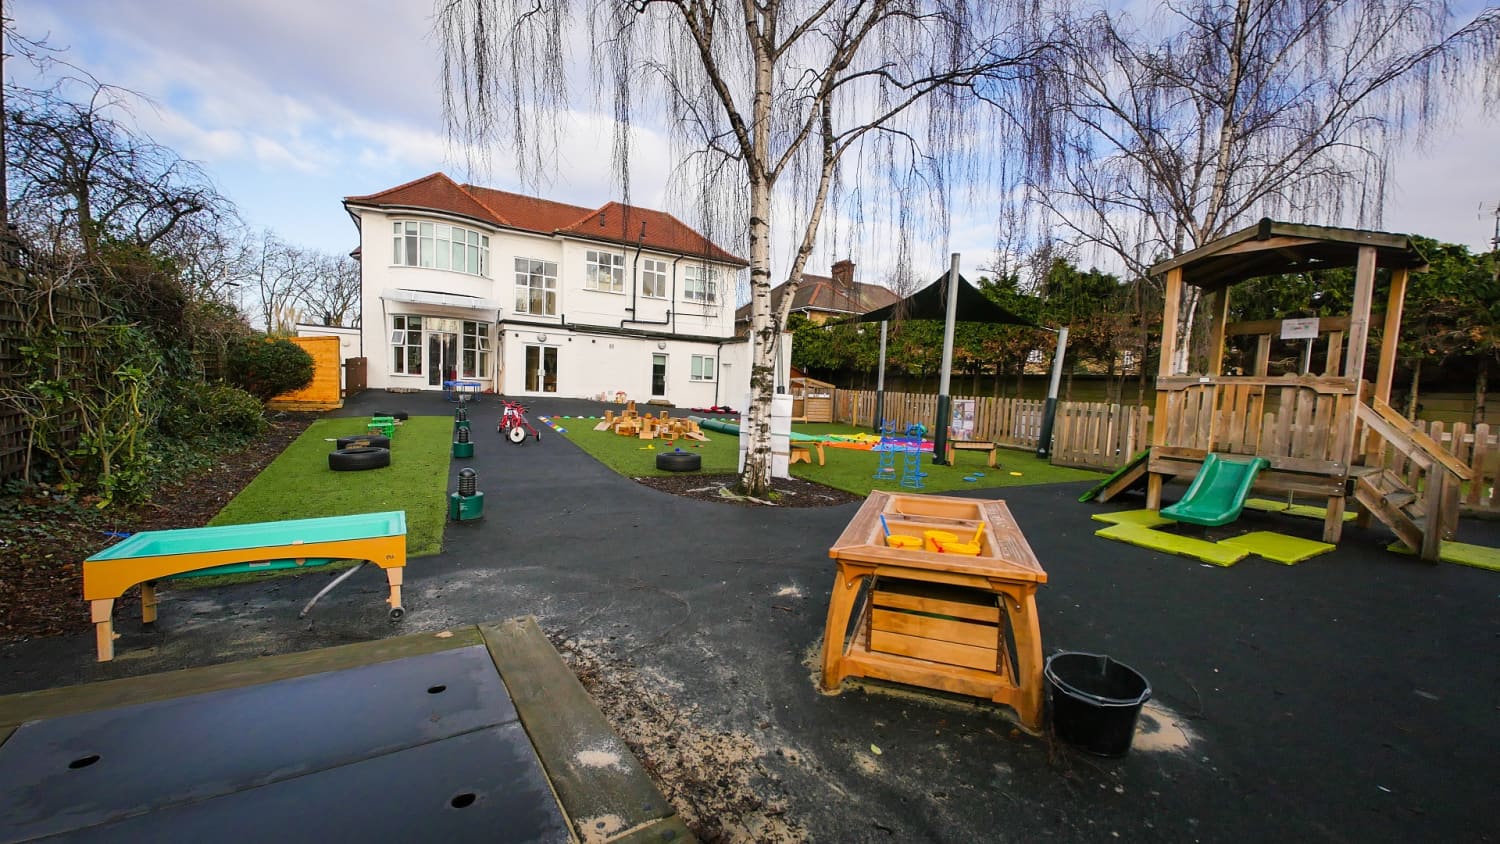 Chestnut Nursery Schools Introductory Careers Image - Arden House